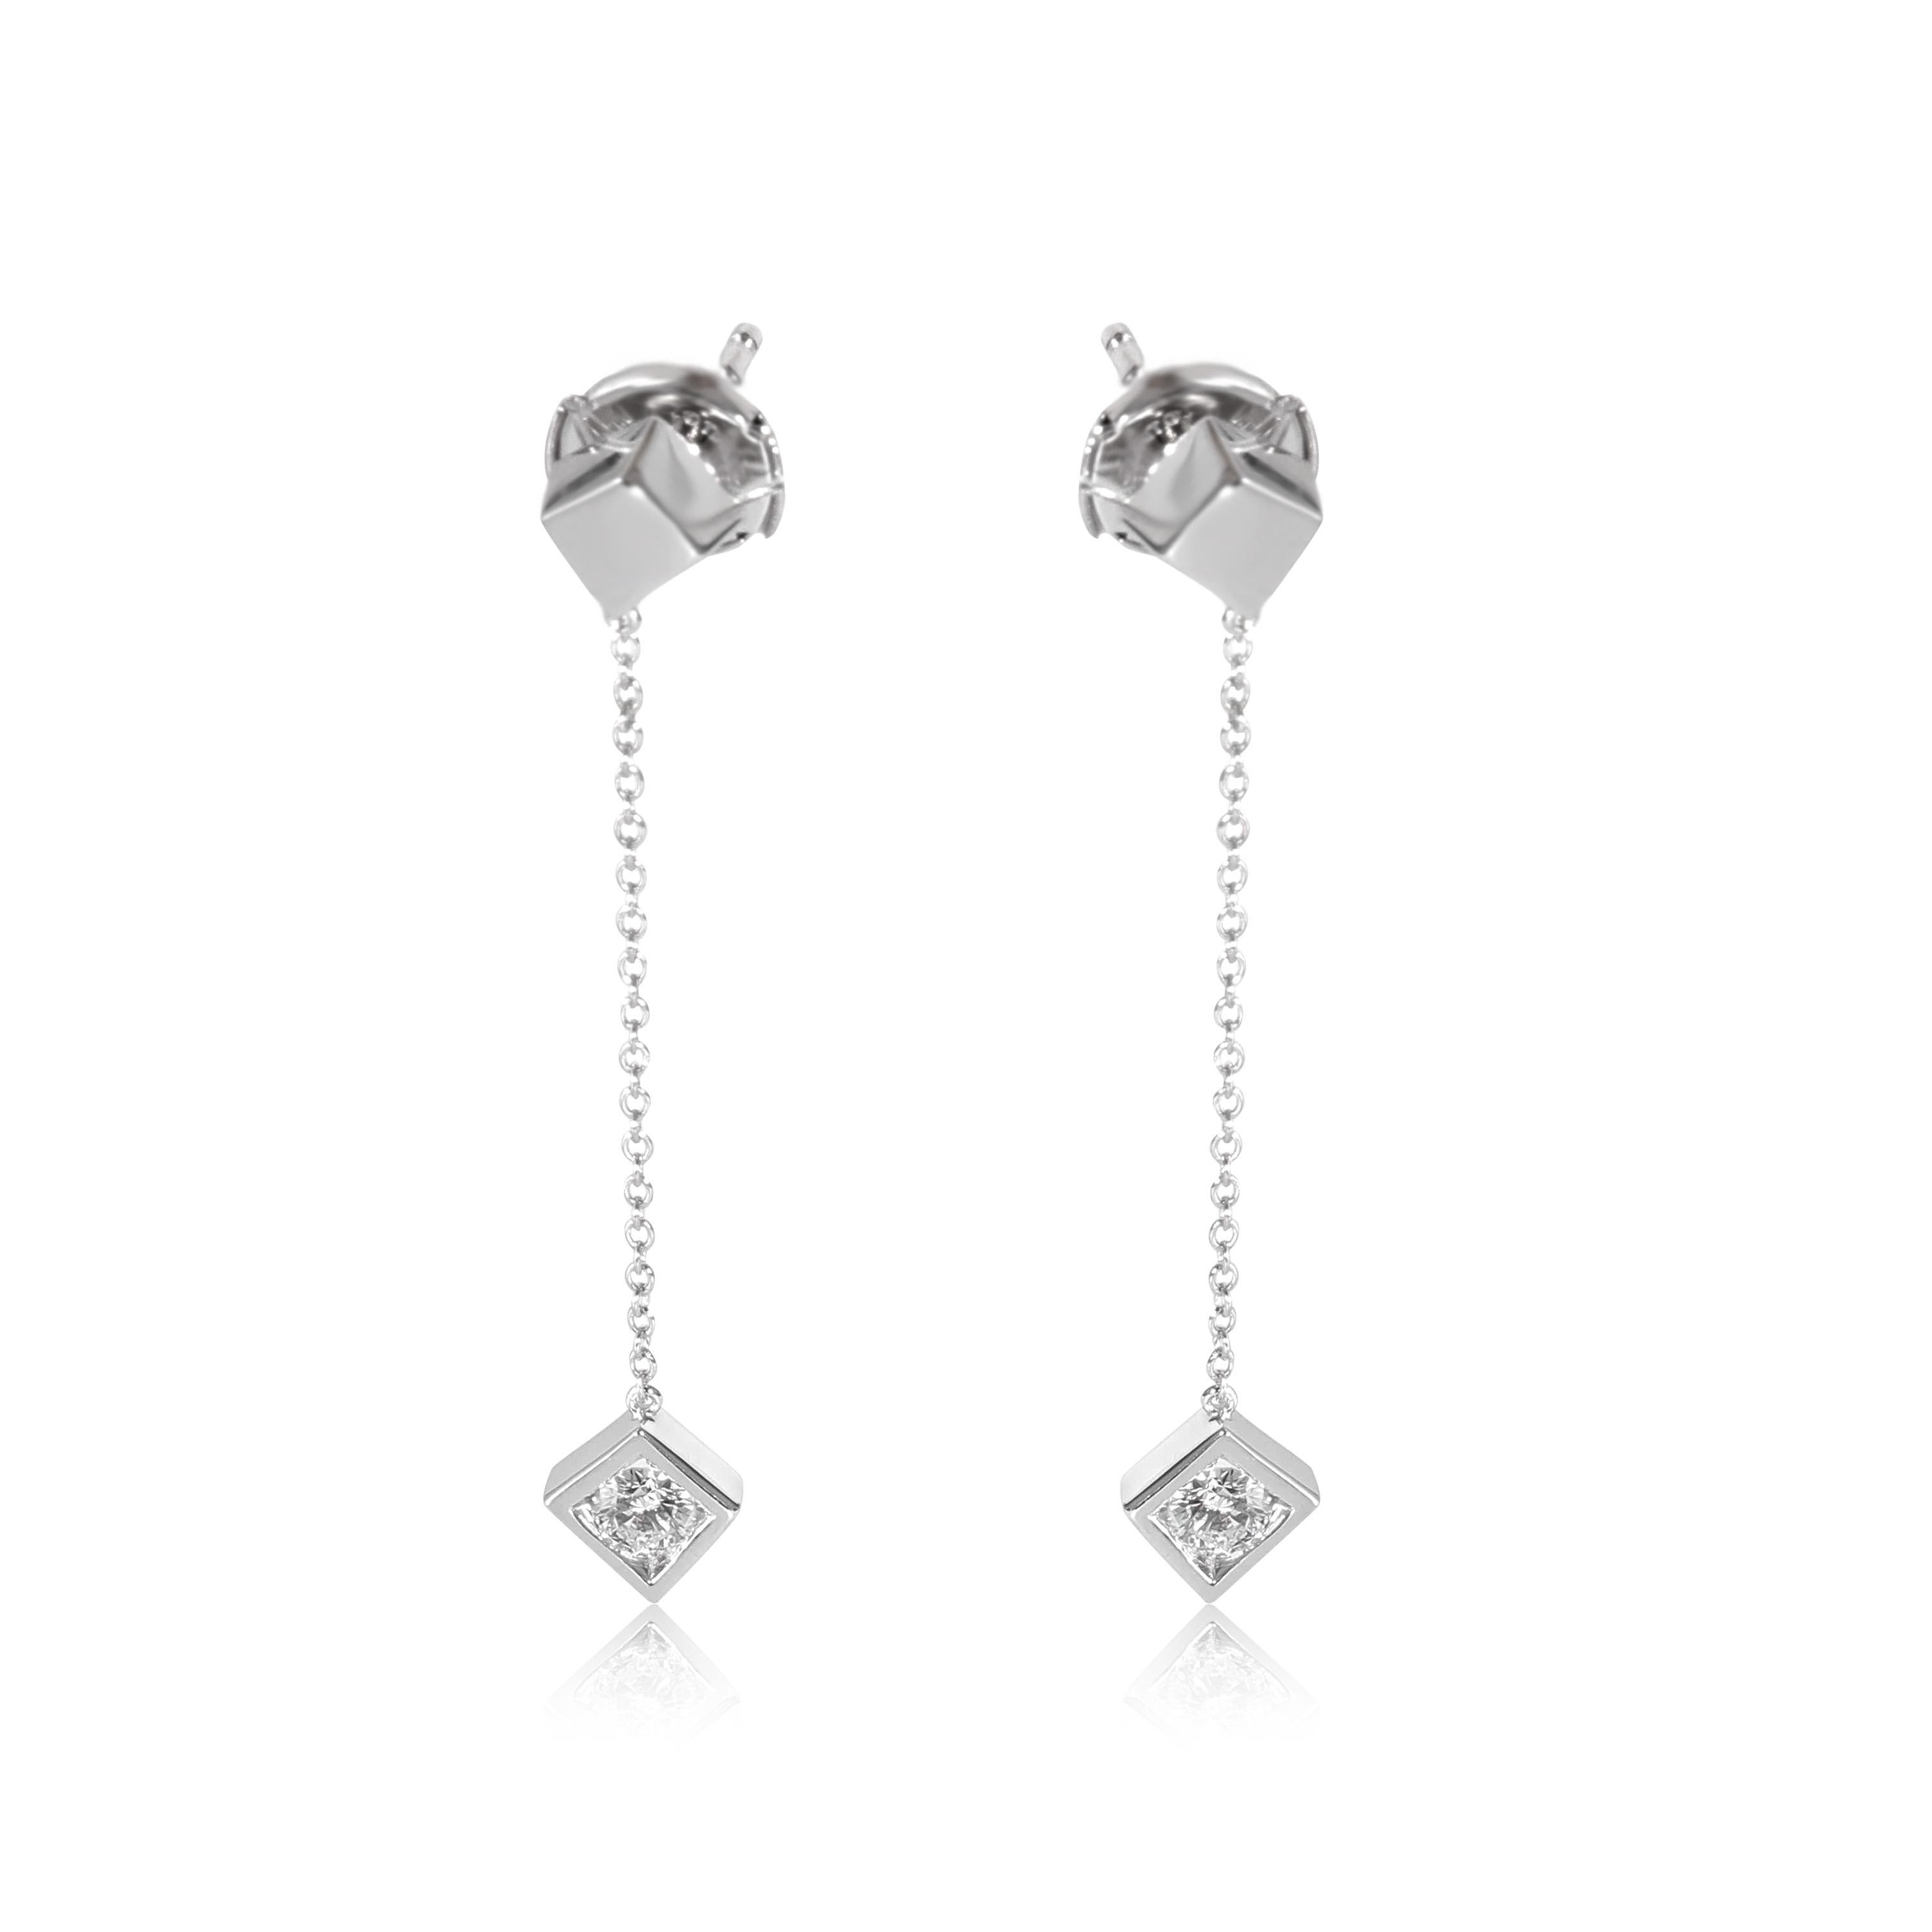 Tiffany & Co. Frank Gehry Torque Cube Drop Earring in 18k White Gold 0.40 CTW

PRIMARY DETAILS
SKU: 131412
Listing Title: Tiffany & Co. Frank Gehry Torque Cube Drop Earring in 18k White Gold 0.40 CTW
Condition Description: In excellent condition and